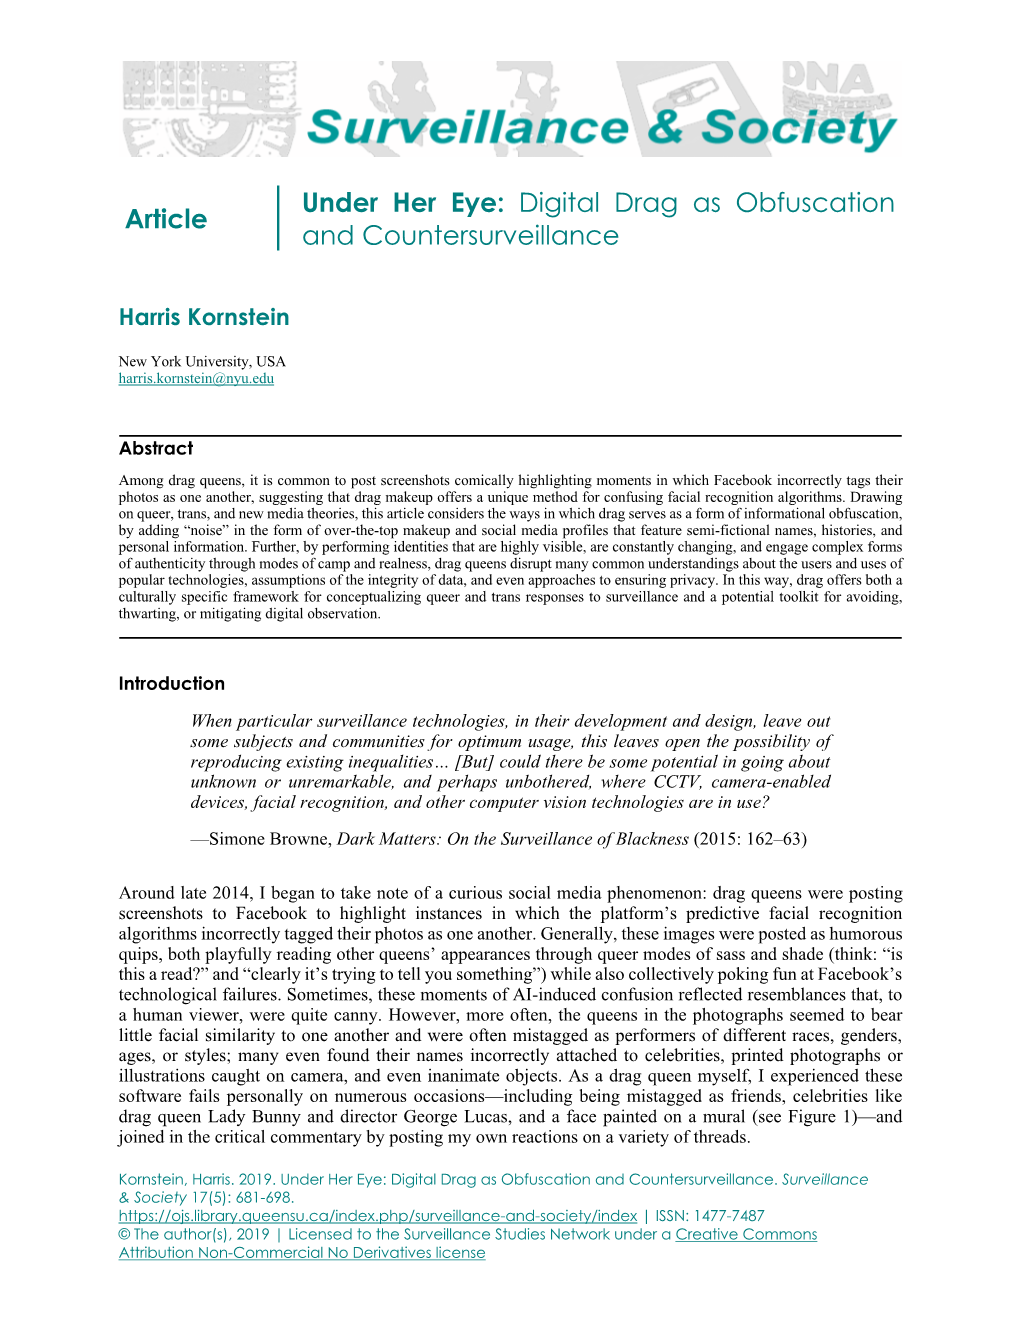 Article Under Her Eye: Digital Drag As Obfuscation and Countersurveillance